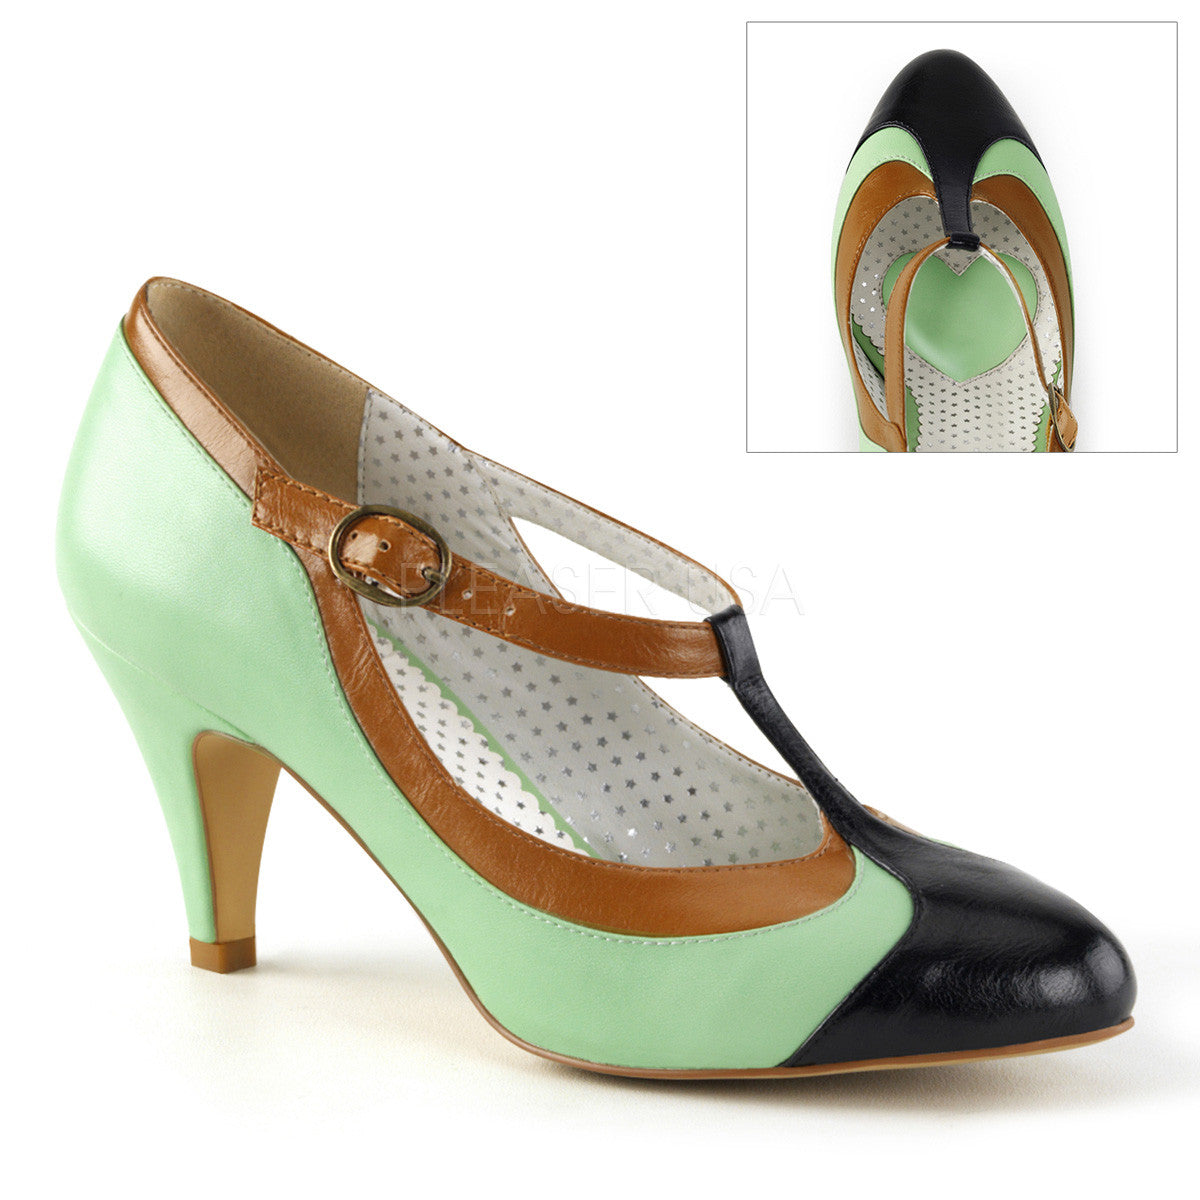 Pin Up Couture PEACH-03 Mint Retro-Inspired Pumps - Shoecup.com - 1